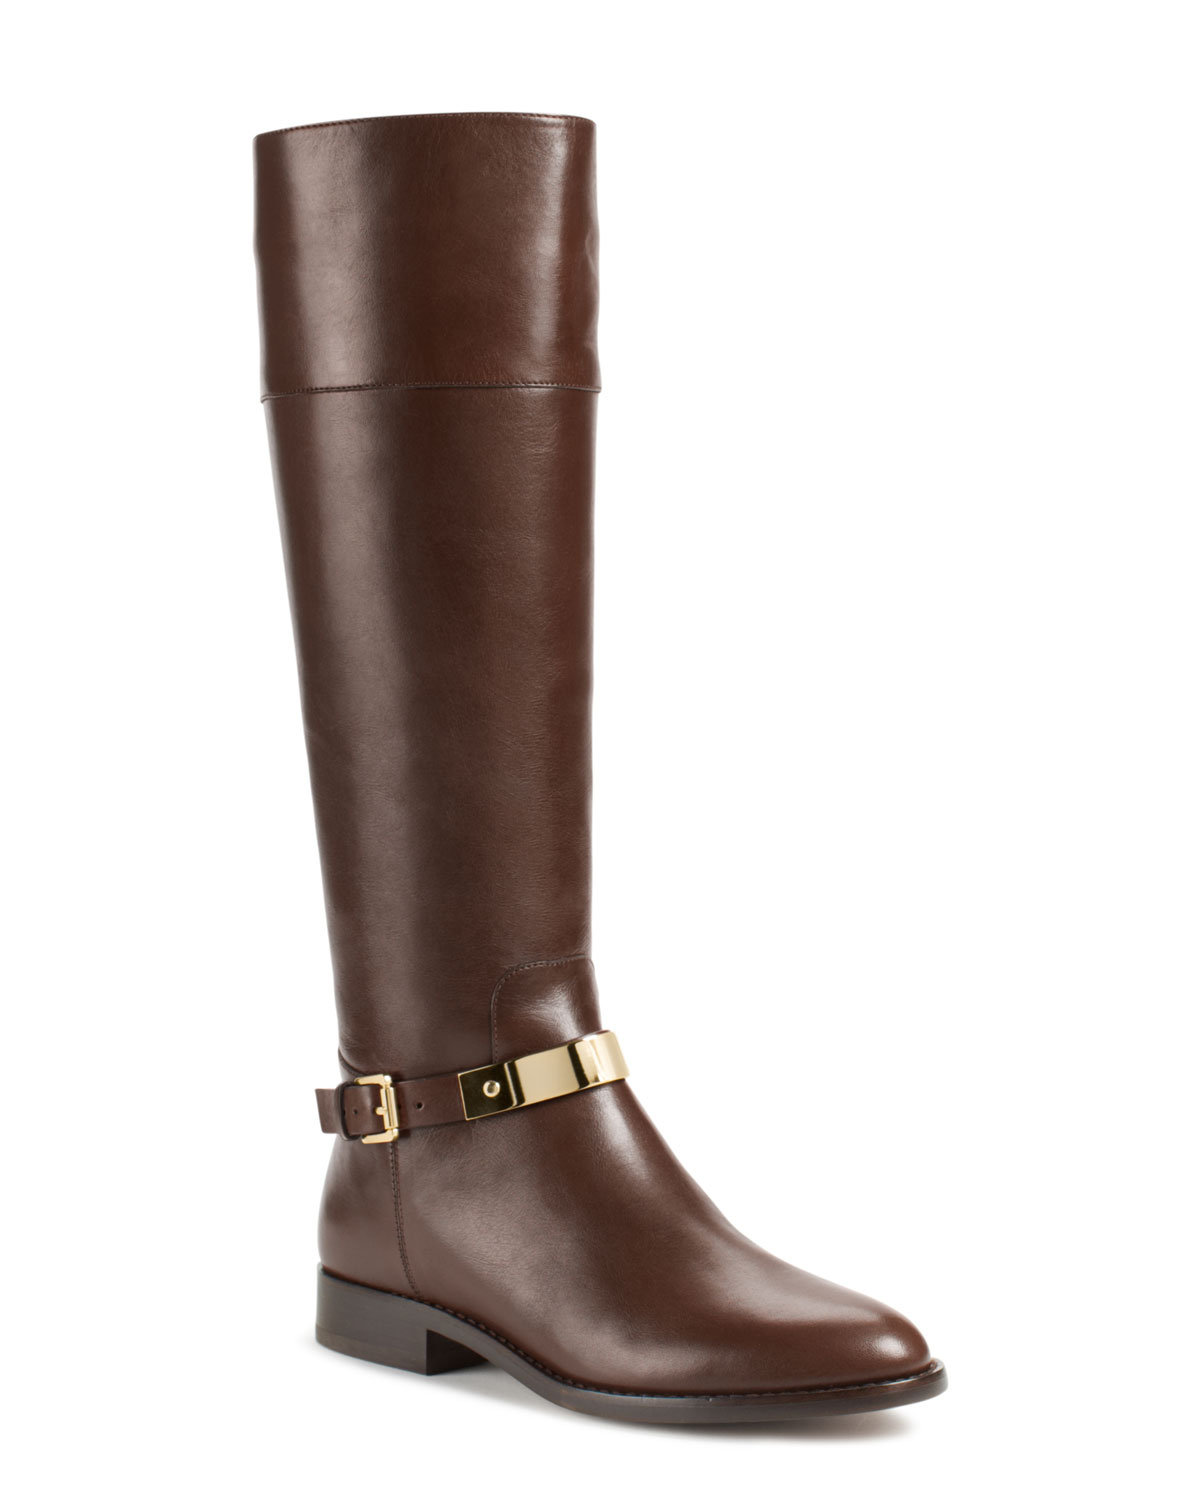 Lyst - Michael Kors Morganna Leather Riding Boot in Brown